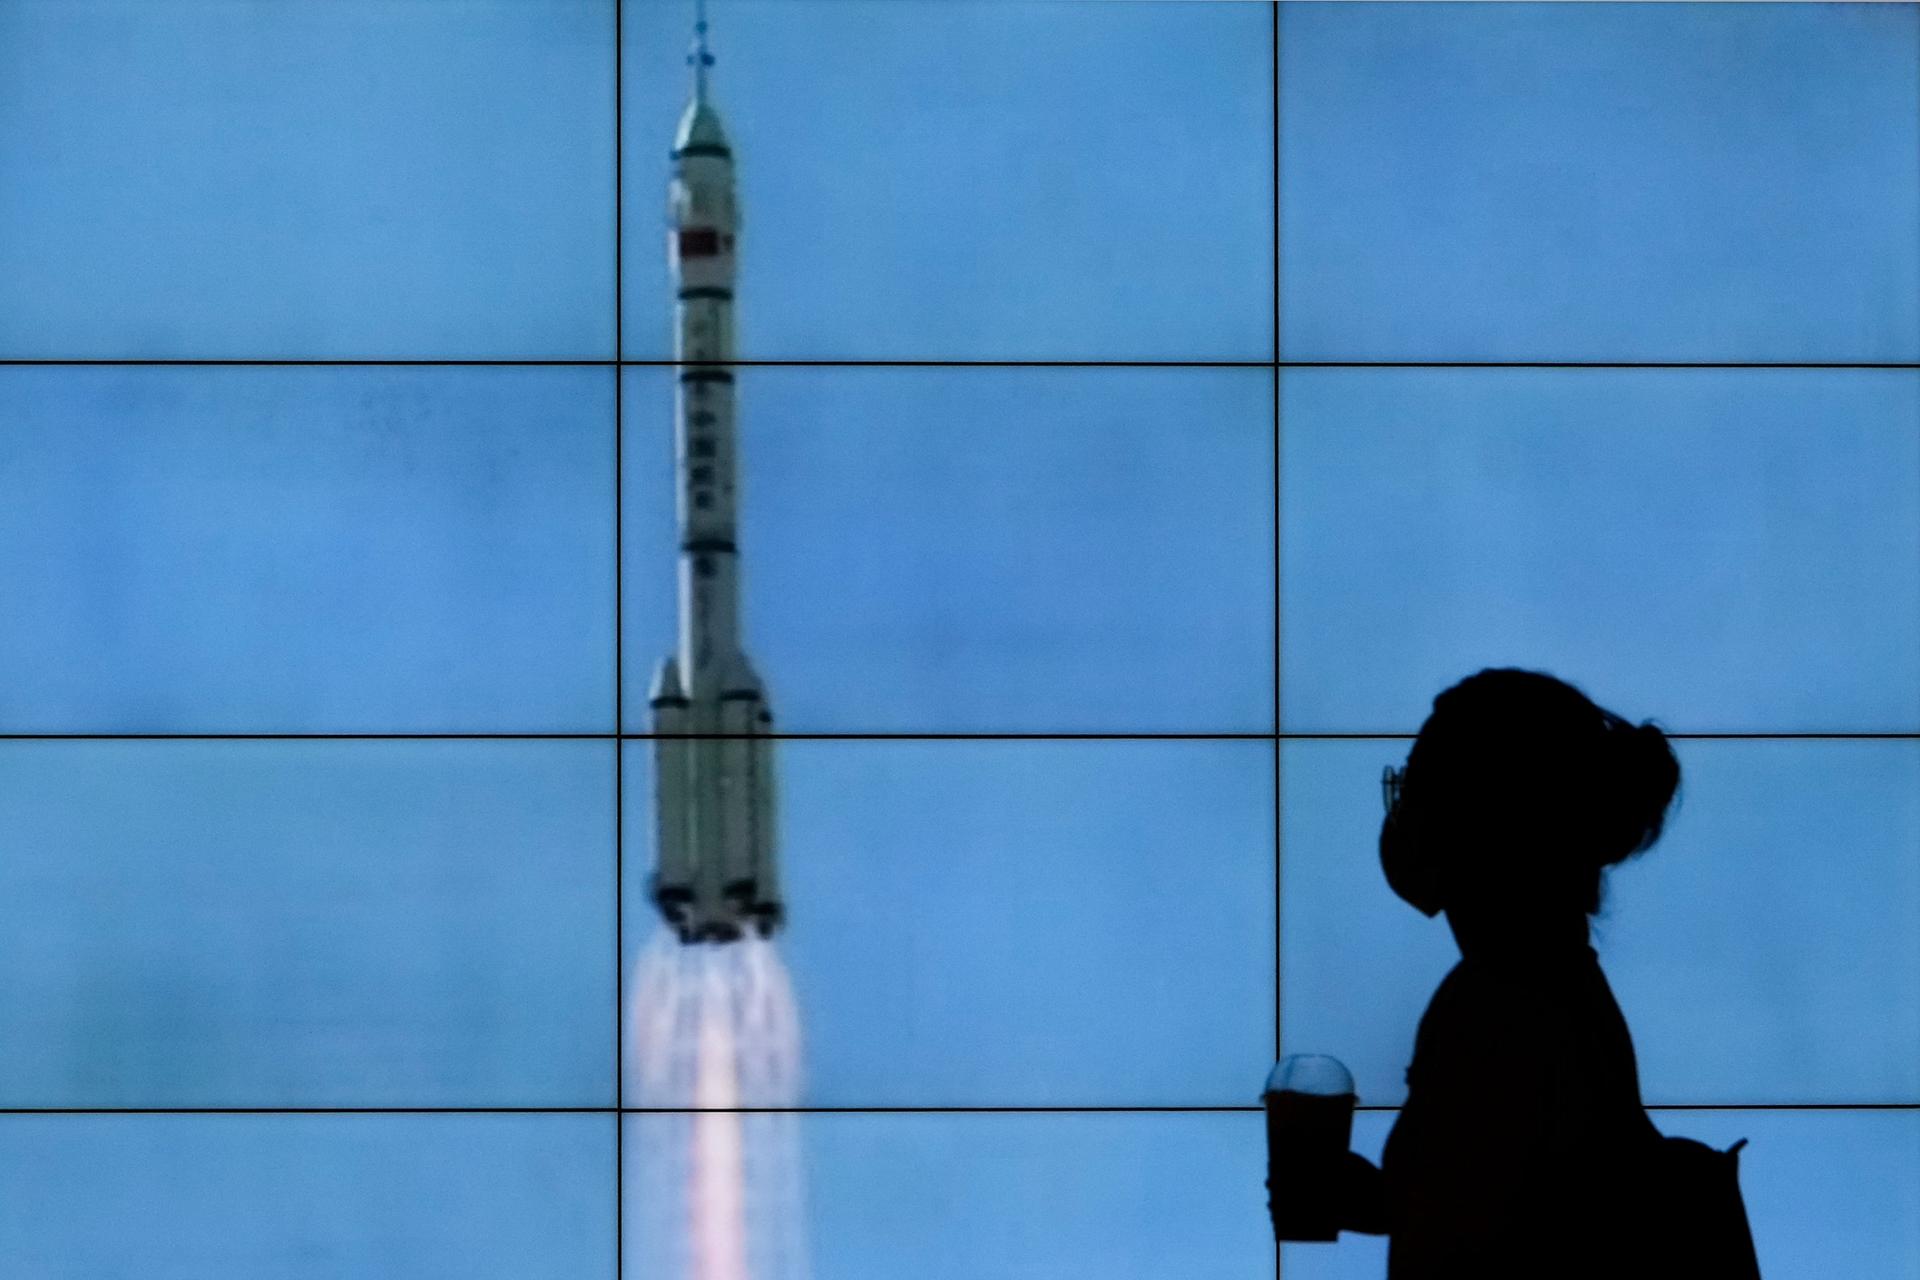 A woman is shown in shadow standing in front of a screen showing the Chinese spacehip lifting off.